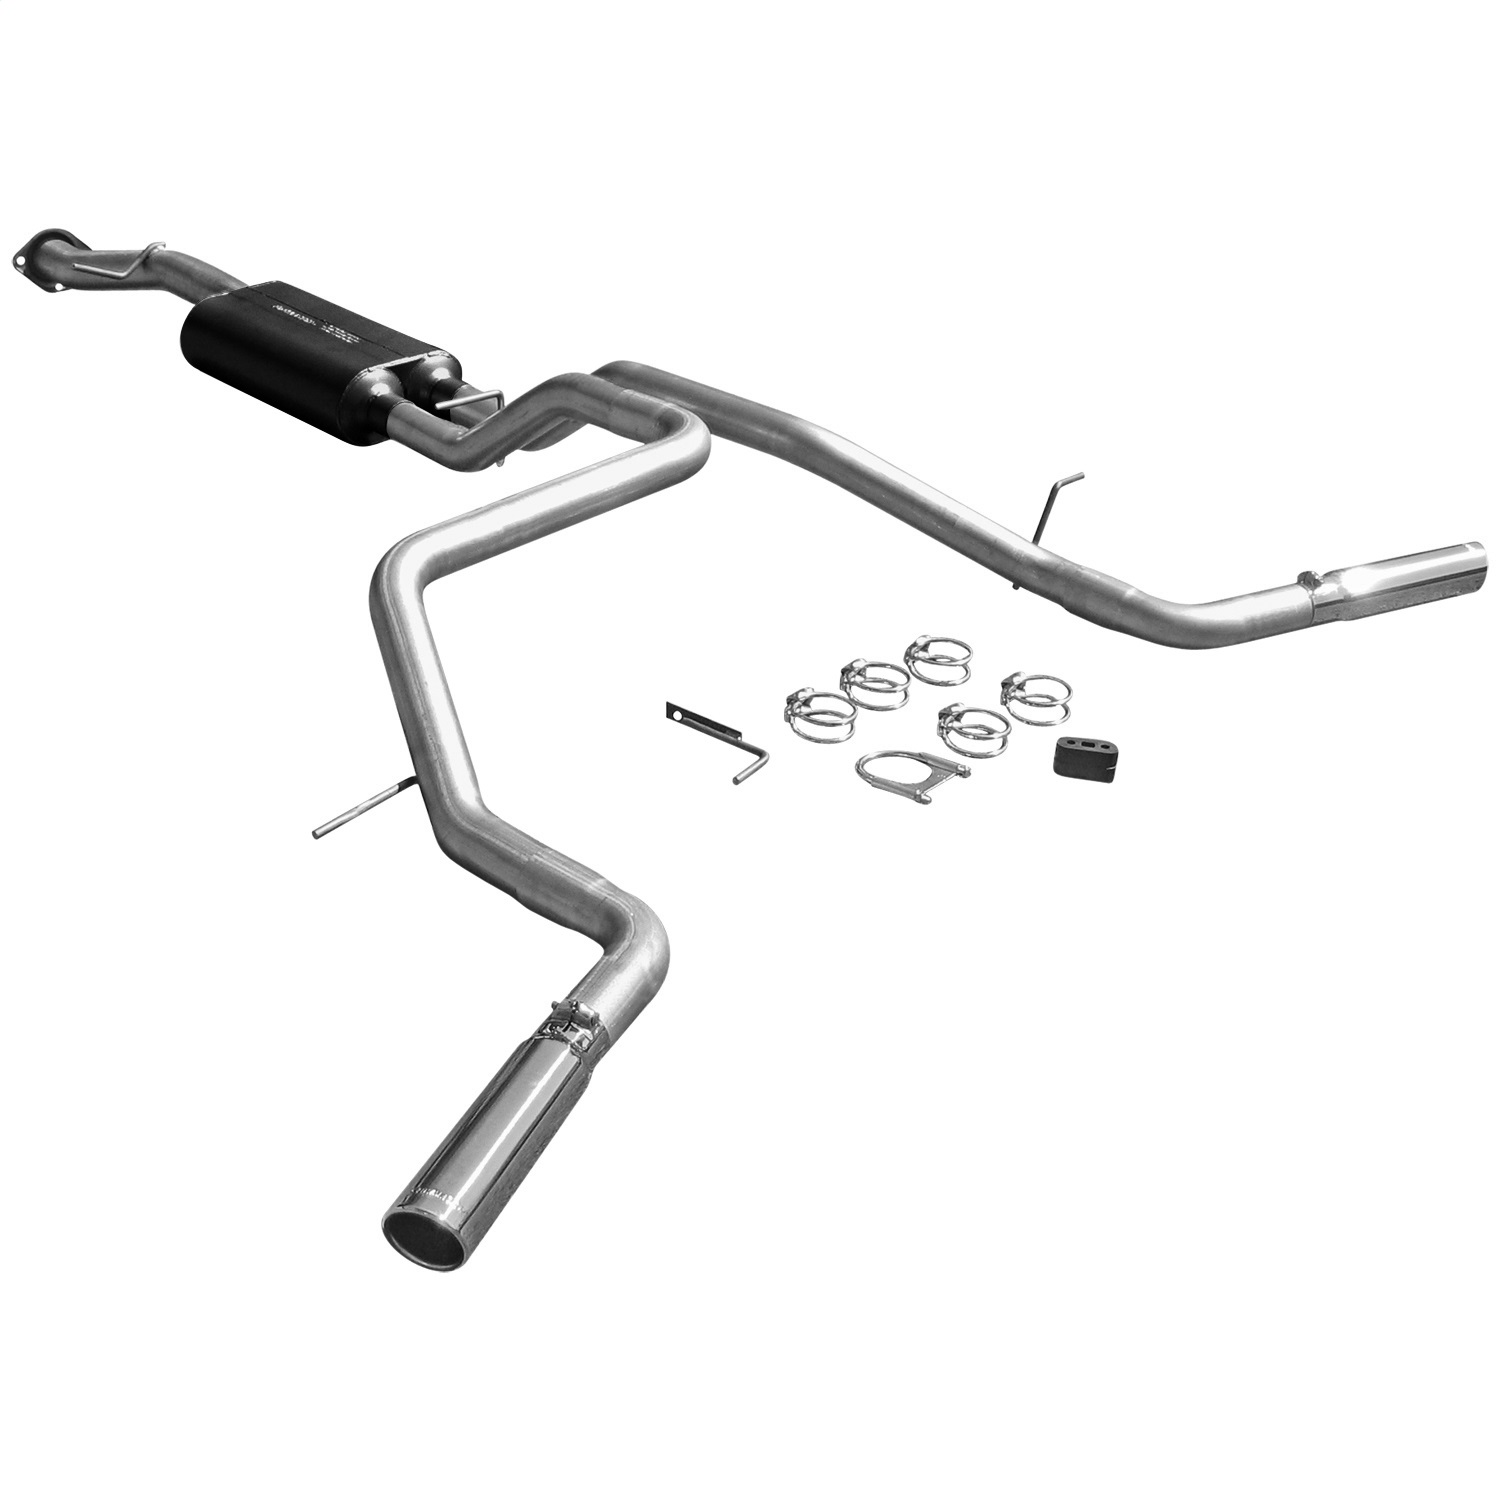 Flowmaster Flowmaster 17419 American Thunder Cat Back Exhaust System Fits 04-06 Tahoe Yukon